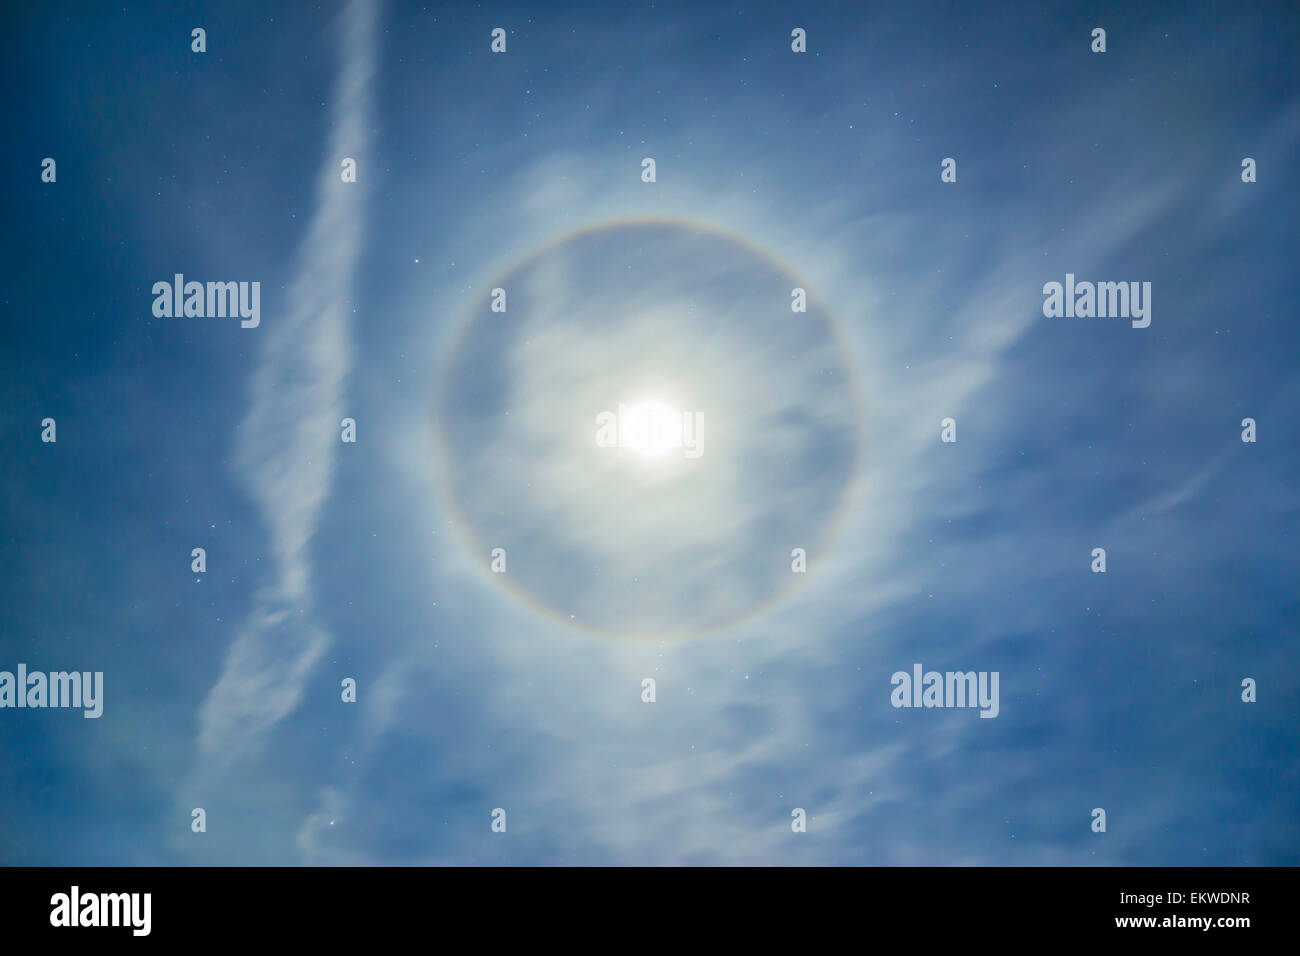 A 22 degree halo around the full moon in a sky of high cirrus clouds and contrails. The moon sits above Orion in the winter sky. Stock Photo